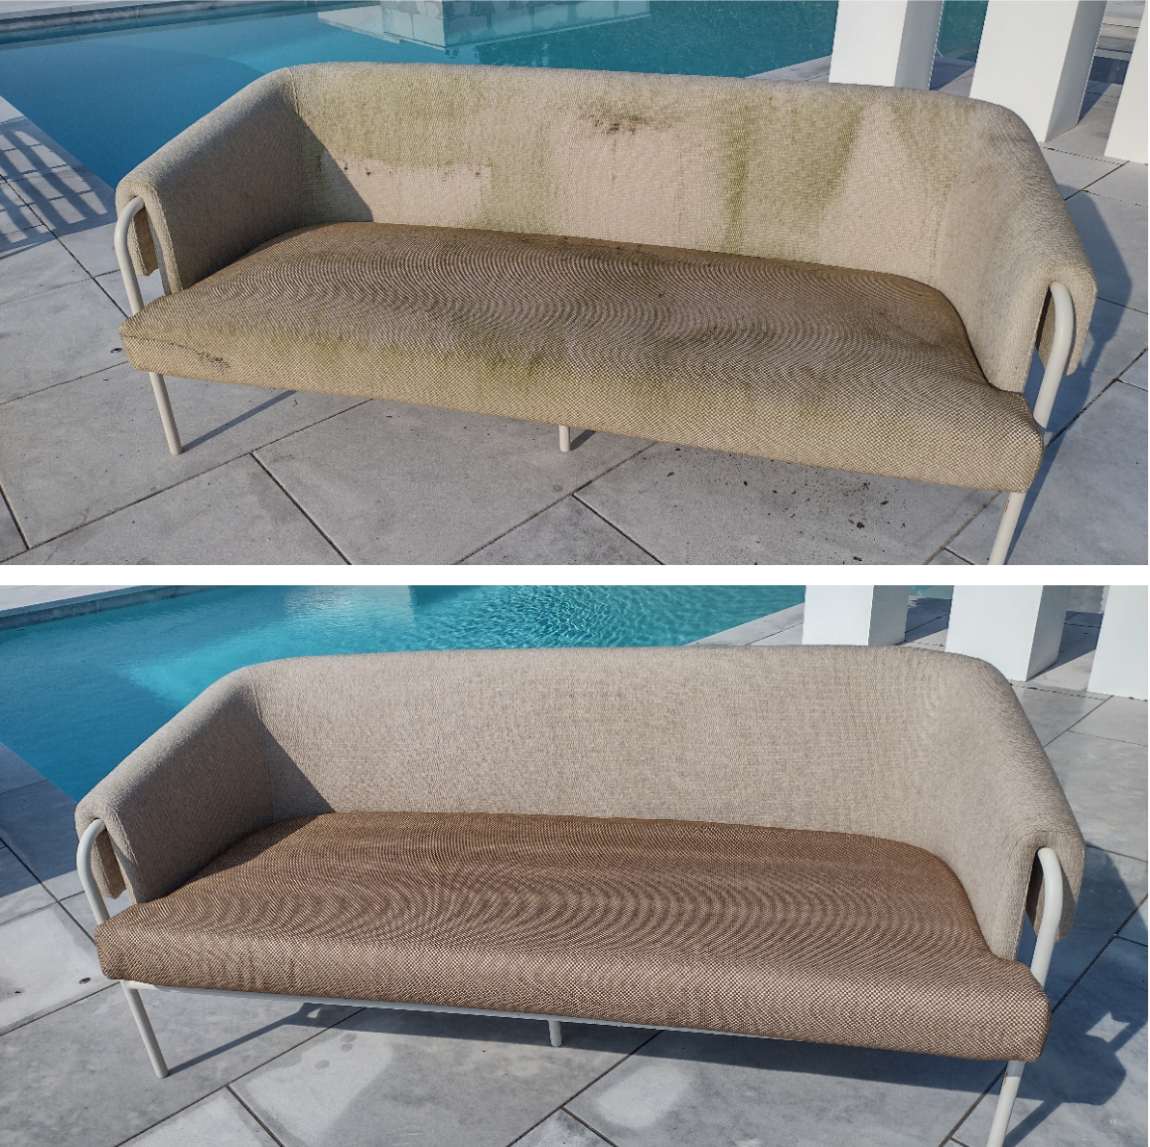 Furniture before and after cleaning